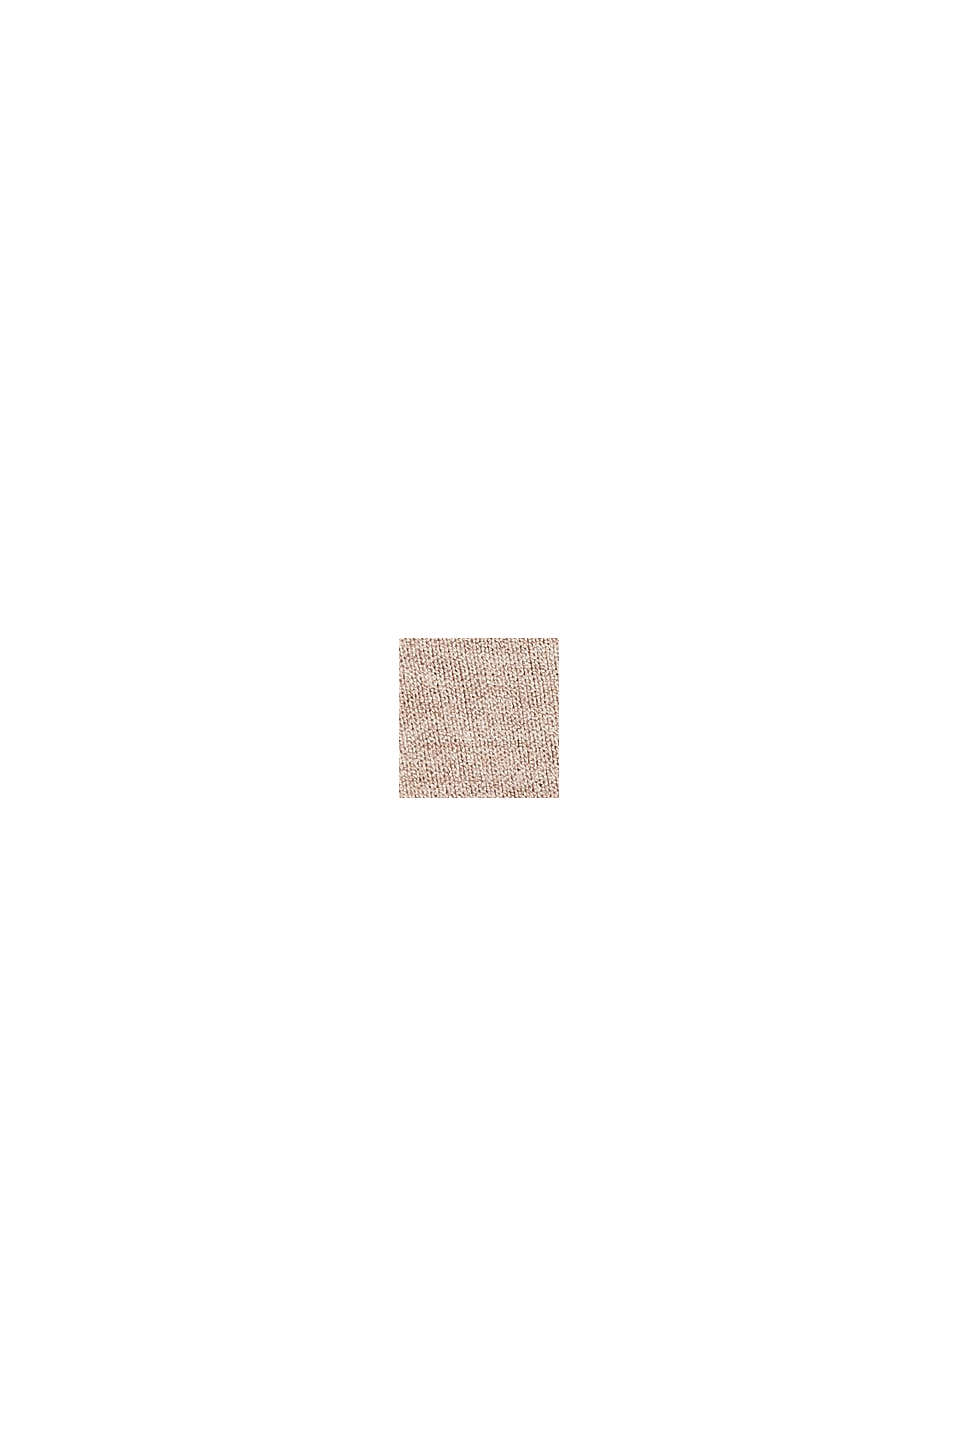 Pullover a maglia fine, LENZING™ ECOVERO™, LIGHT TAUPE, swatch